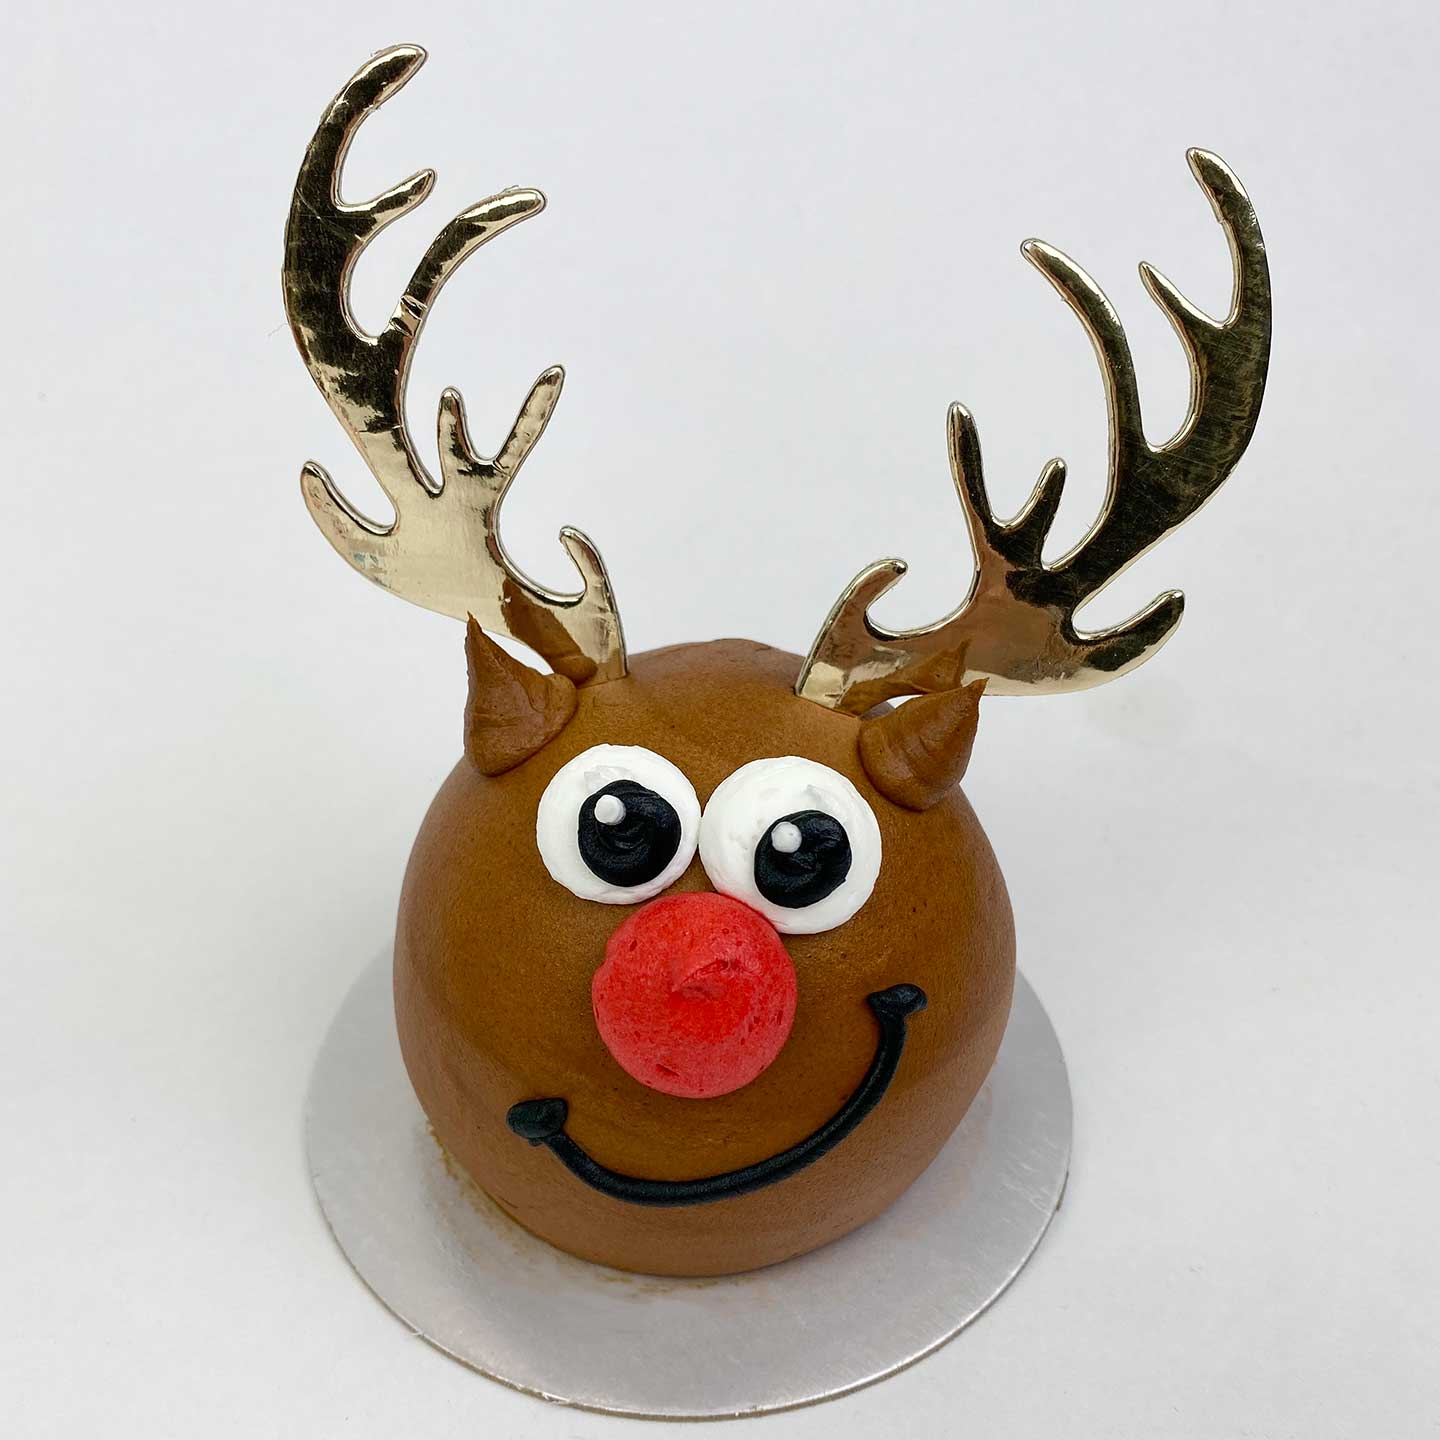 3D Whitetail Deer's Head Cake - CakeCentral.com